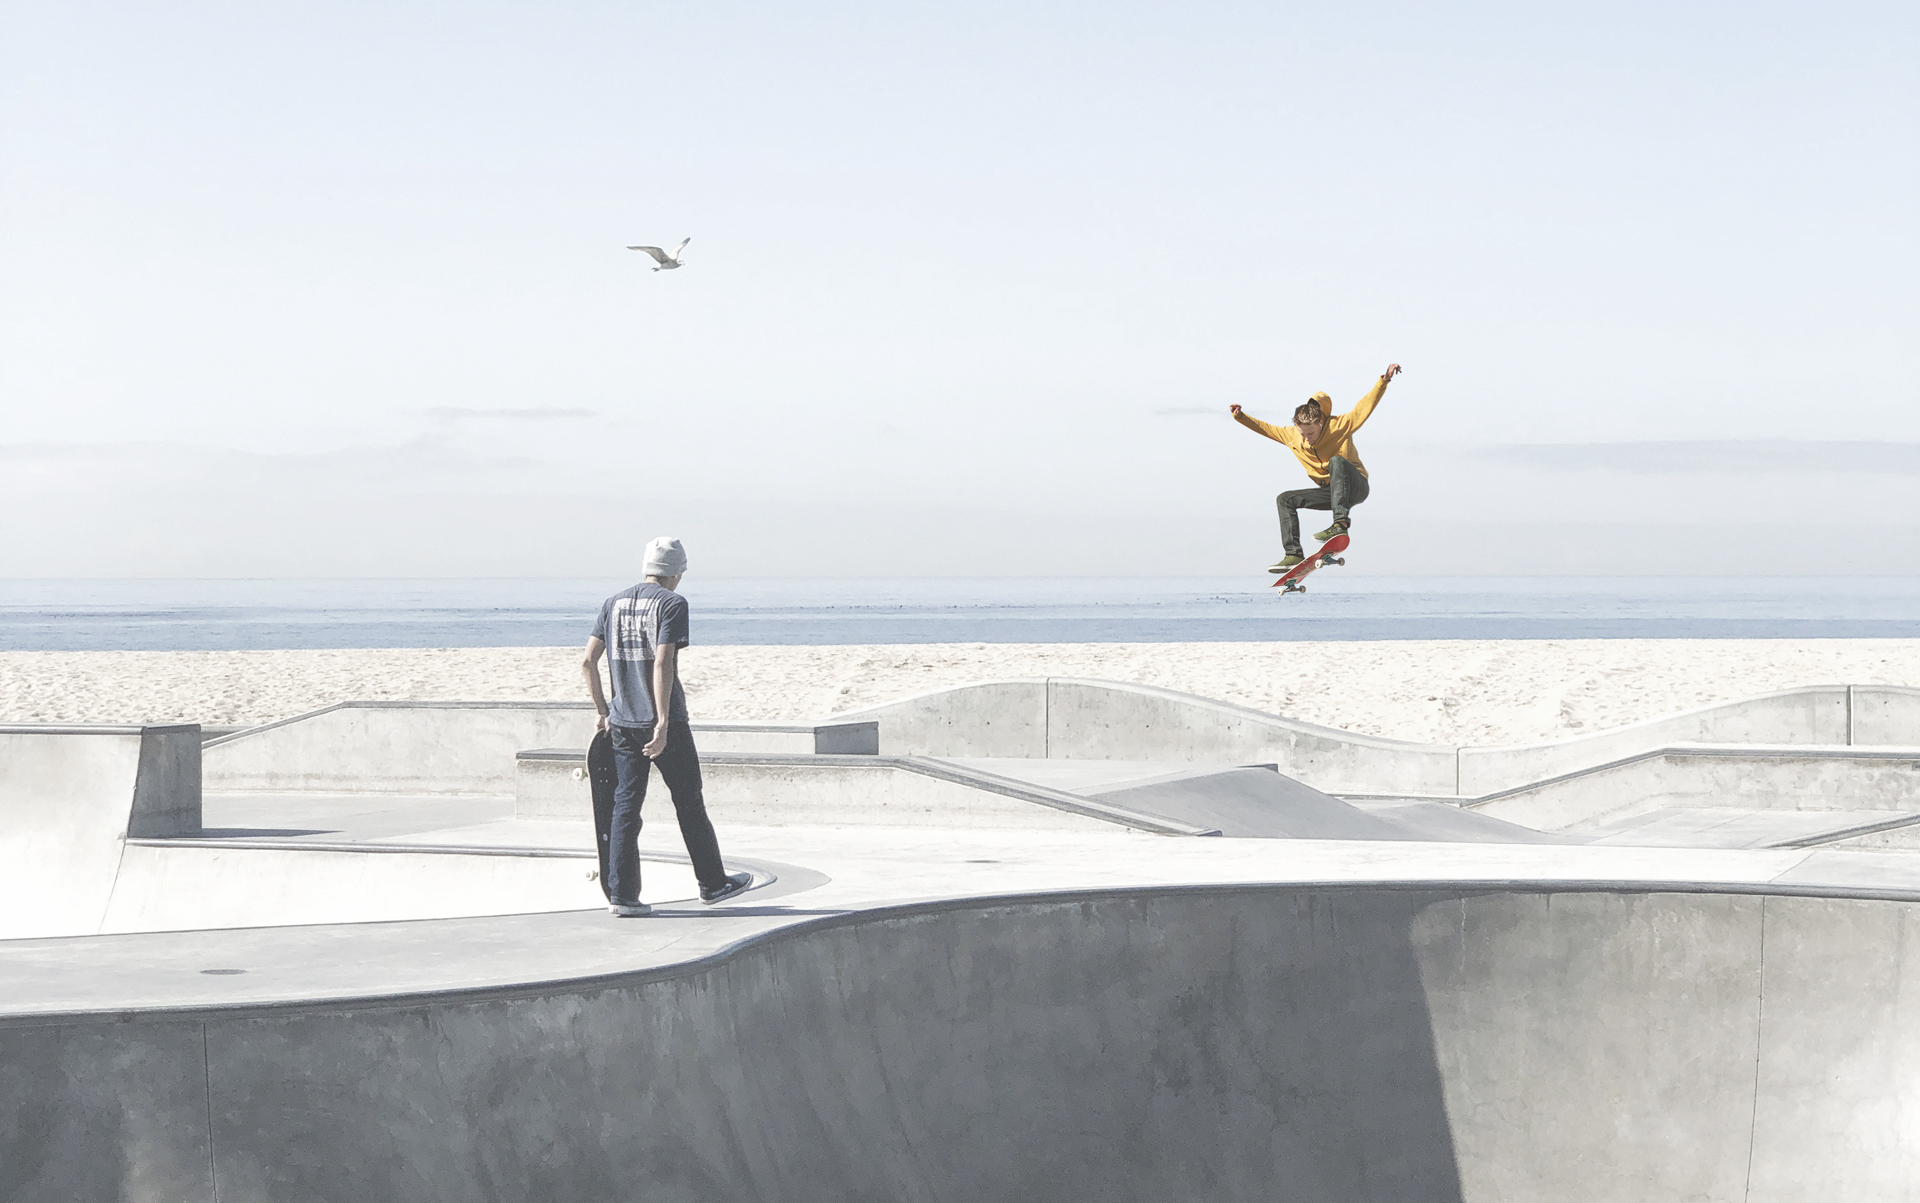 Two skaters in a concrete skate park, one jumping, the other holding his board. The sea and a seagull can be seen in the background.